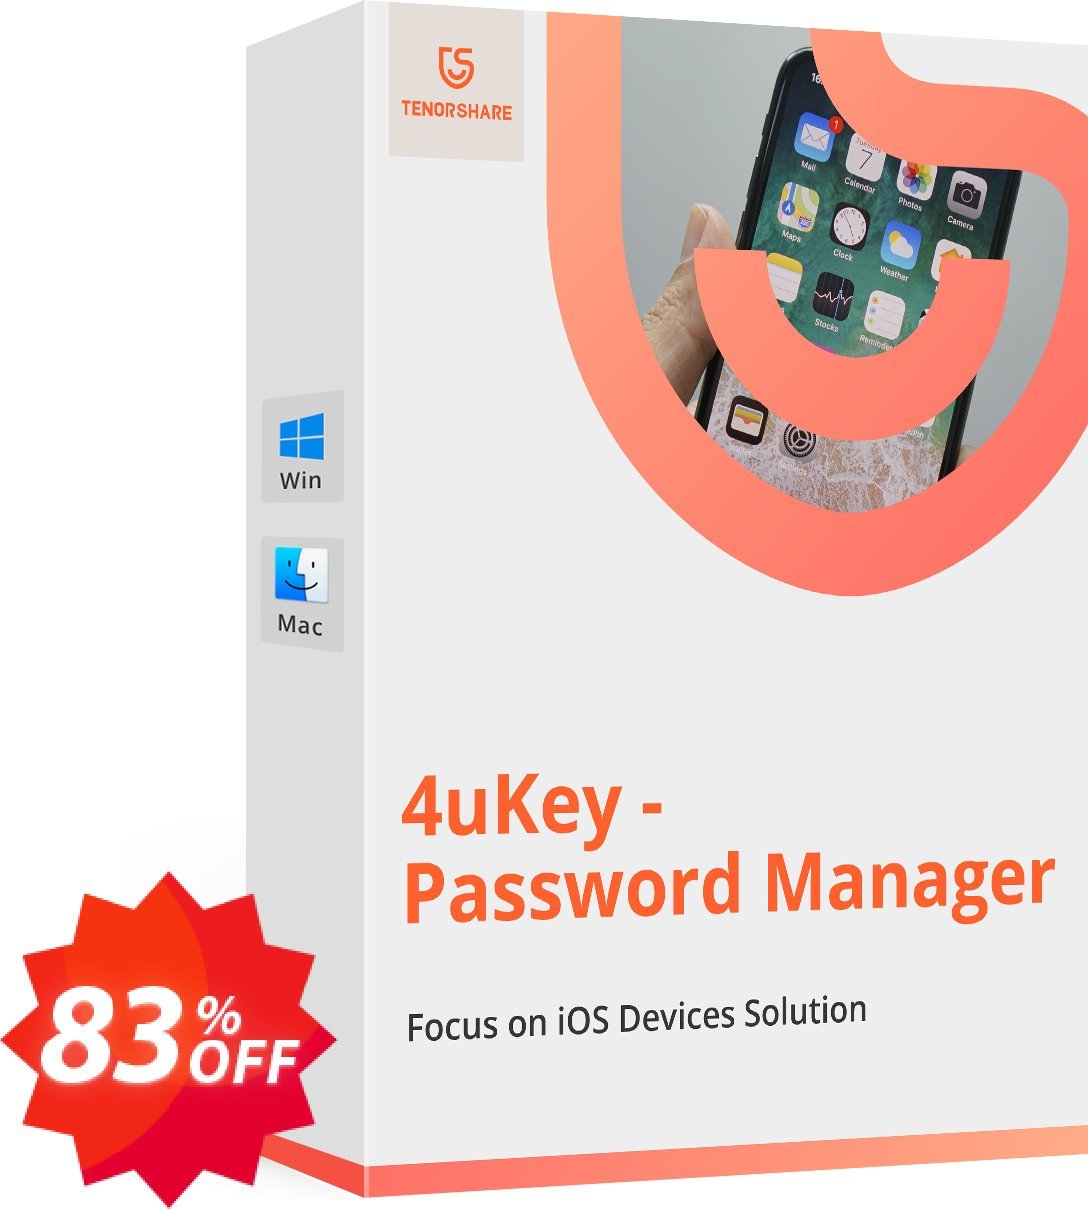 Tenorshare 4uKey Password Manager for MAC Coupon code 83% discount 